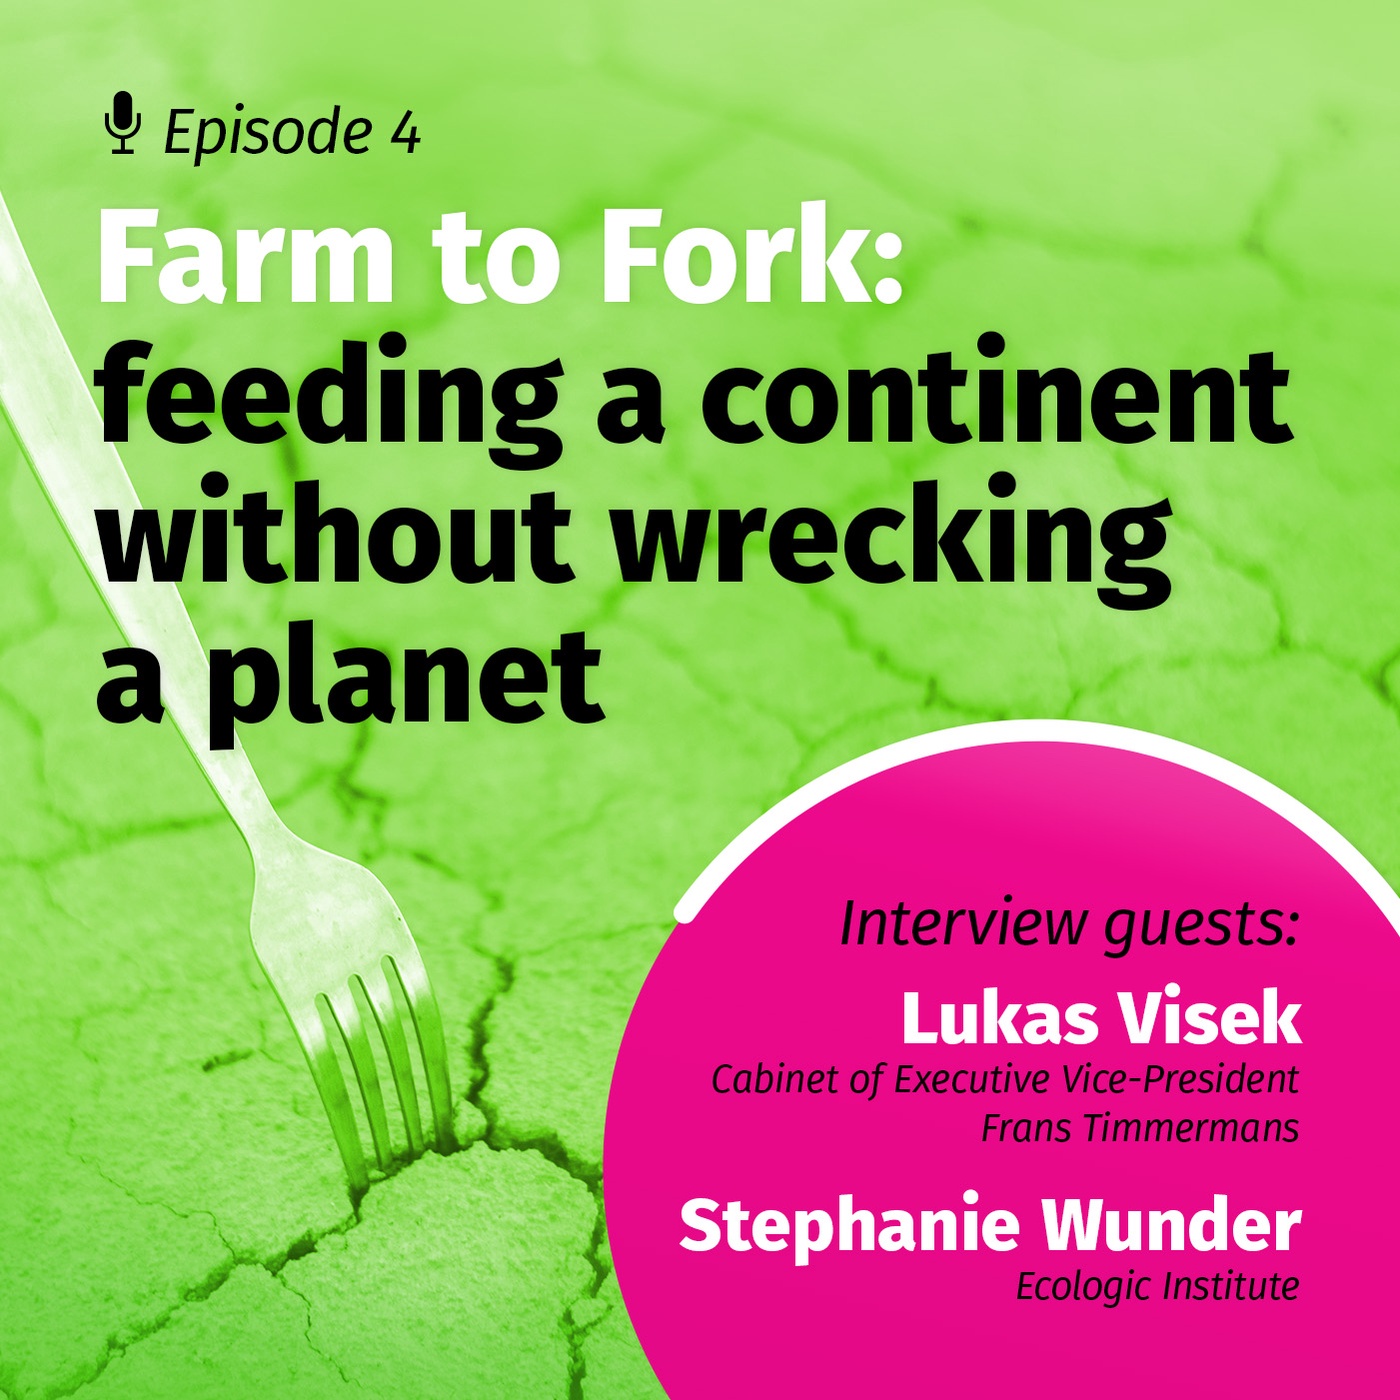 Farm to Fork: feeding a continent without wrecking a planet